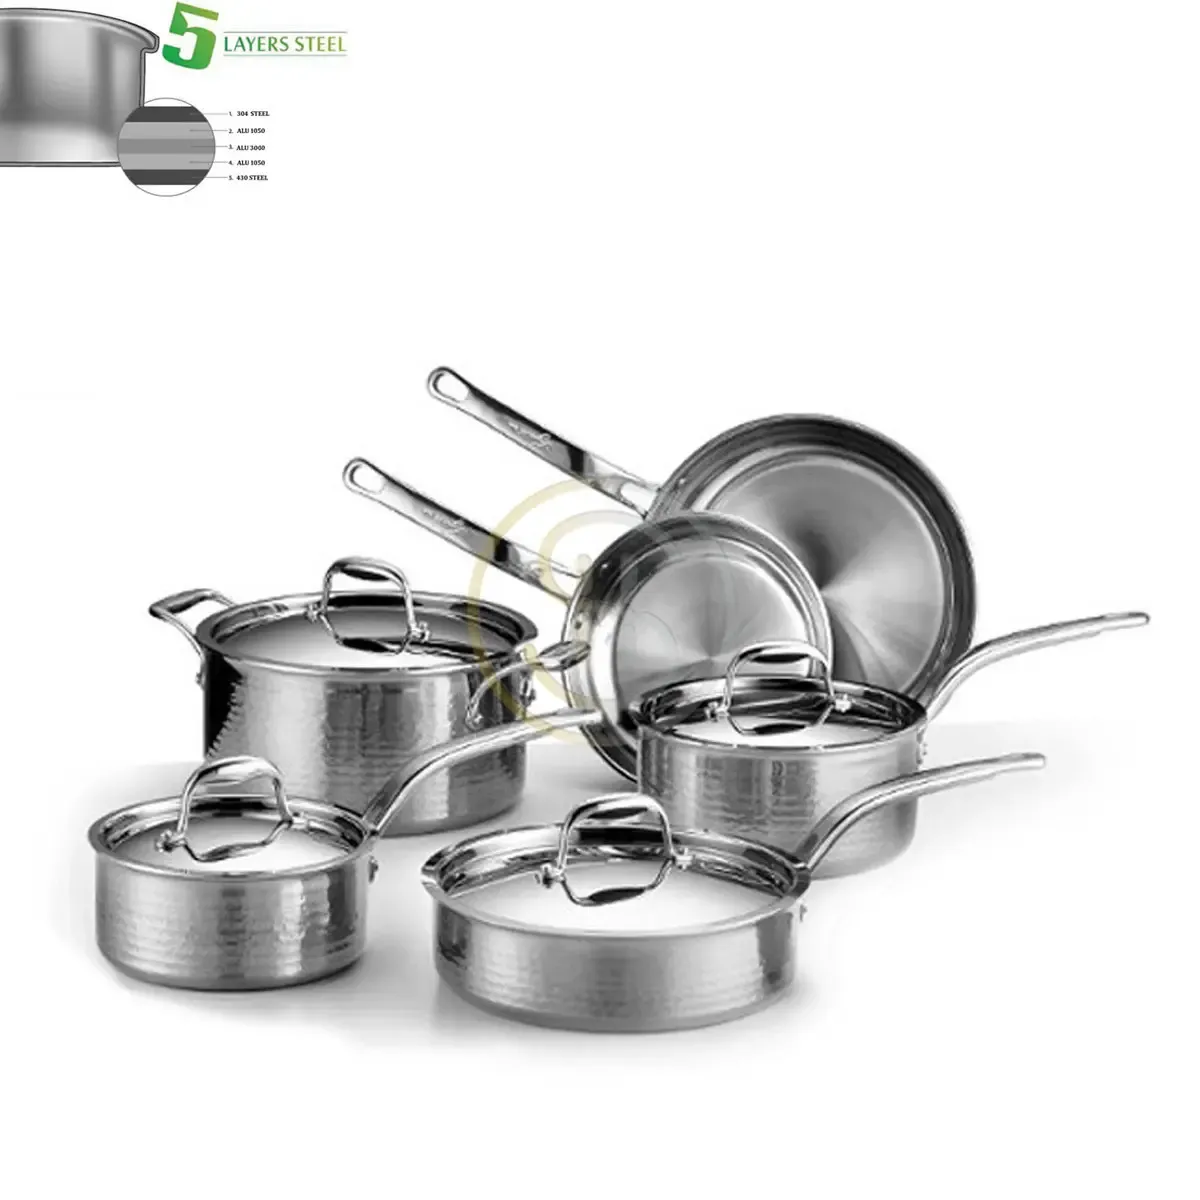 10PCS 5Ply All Clad Steel Body cookware set